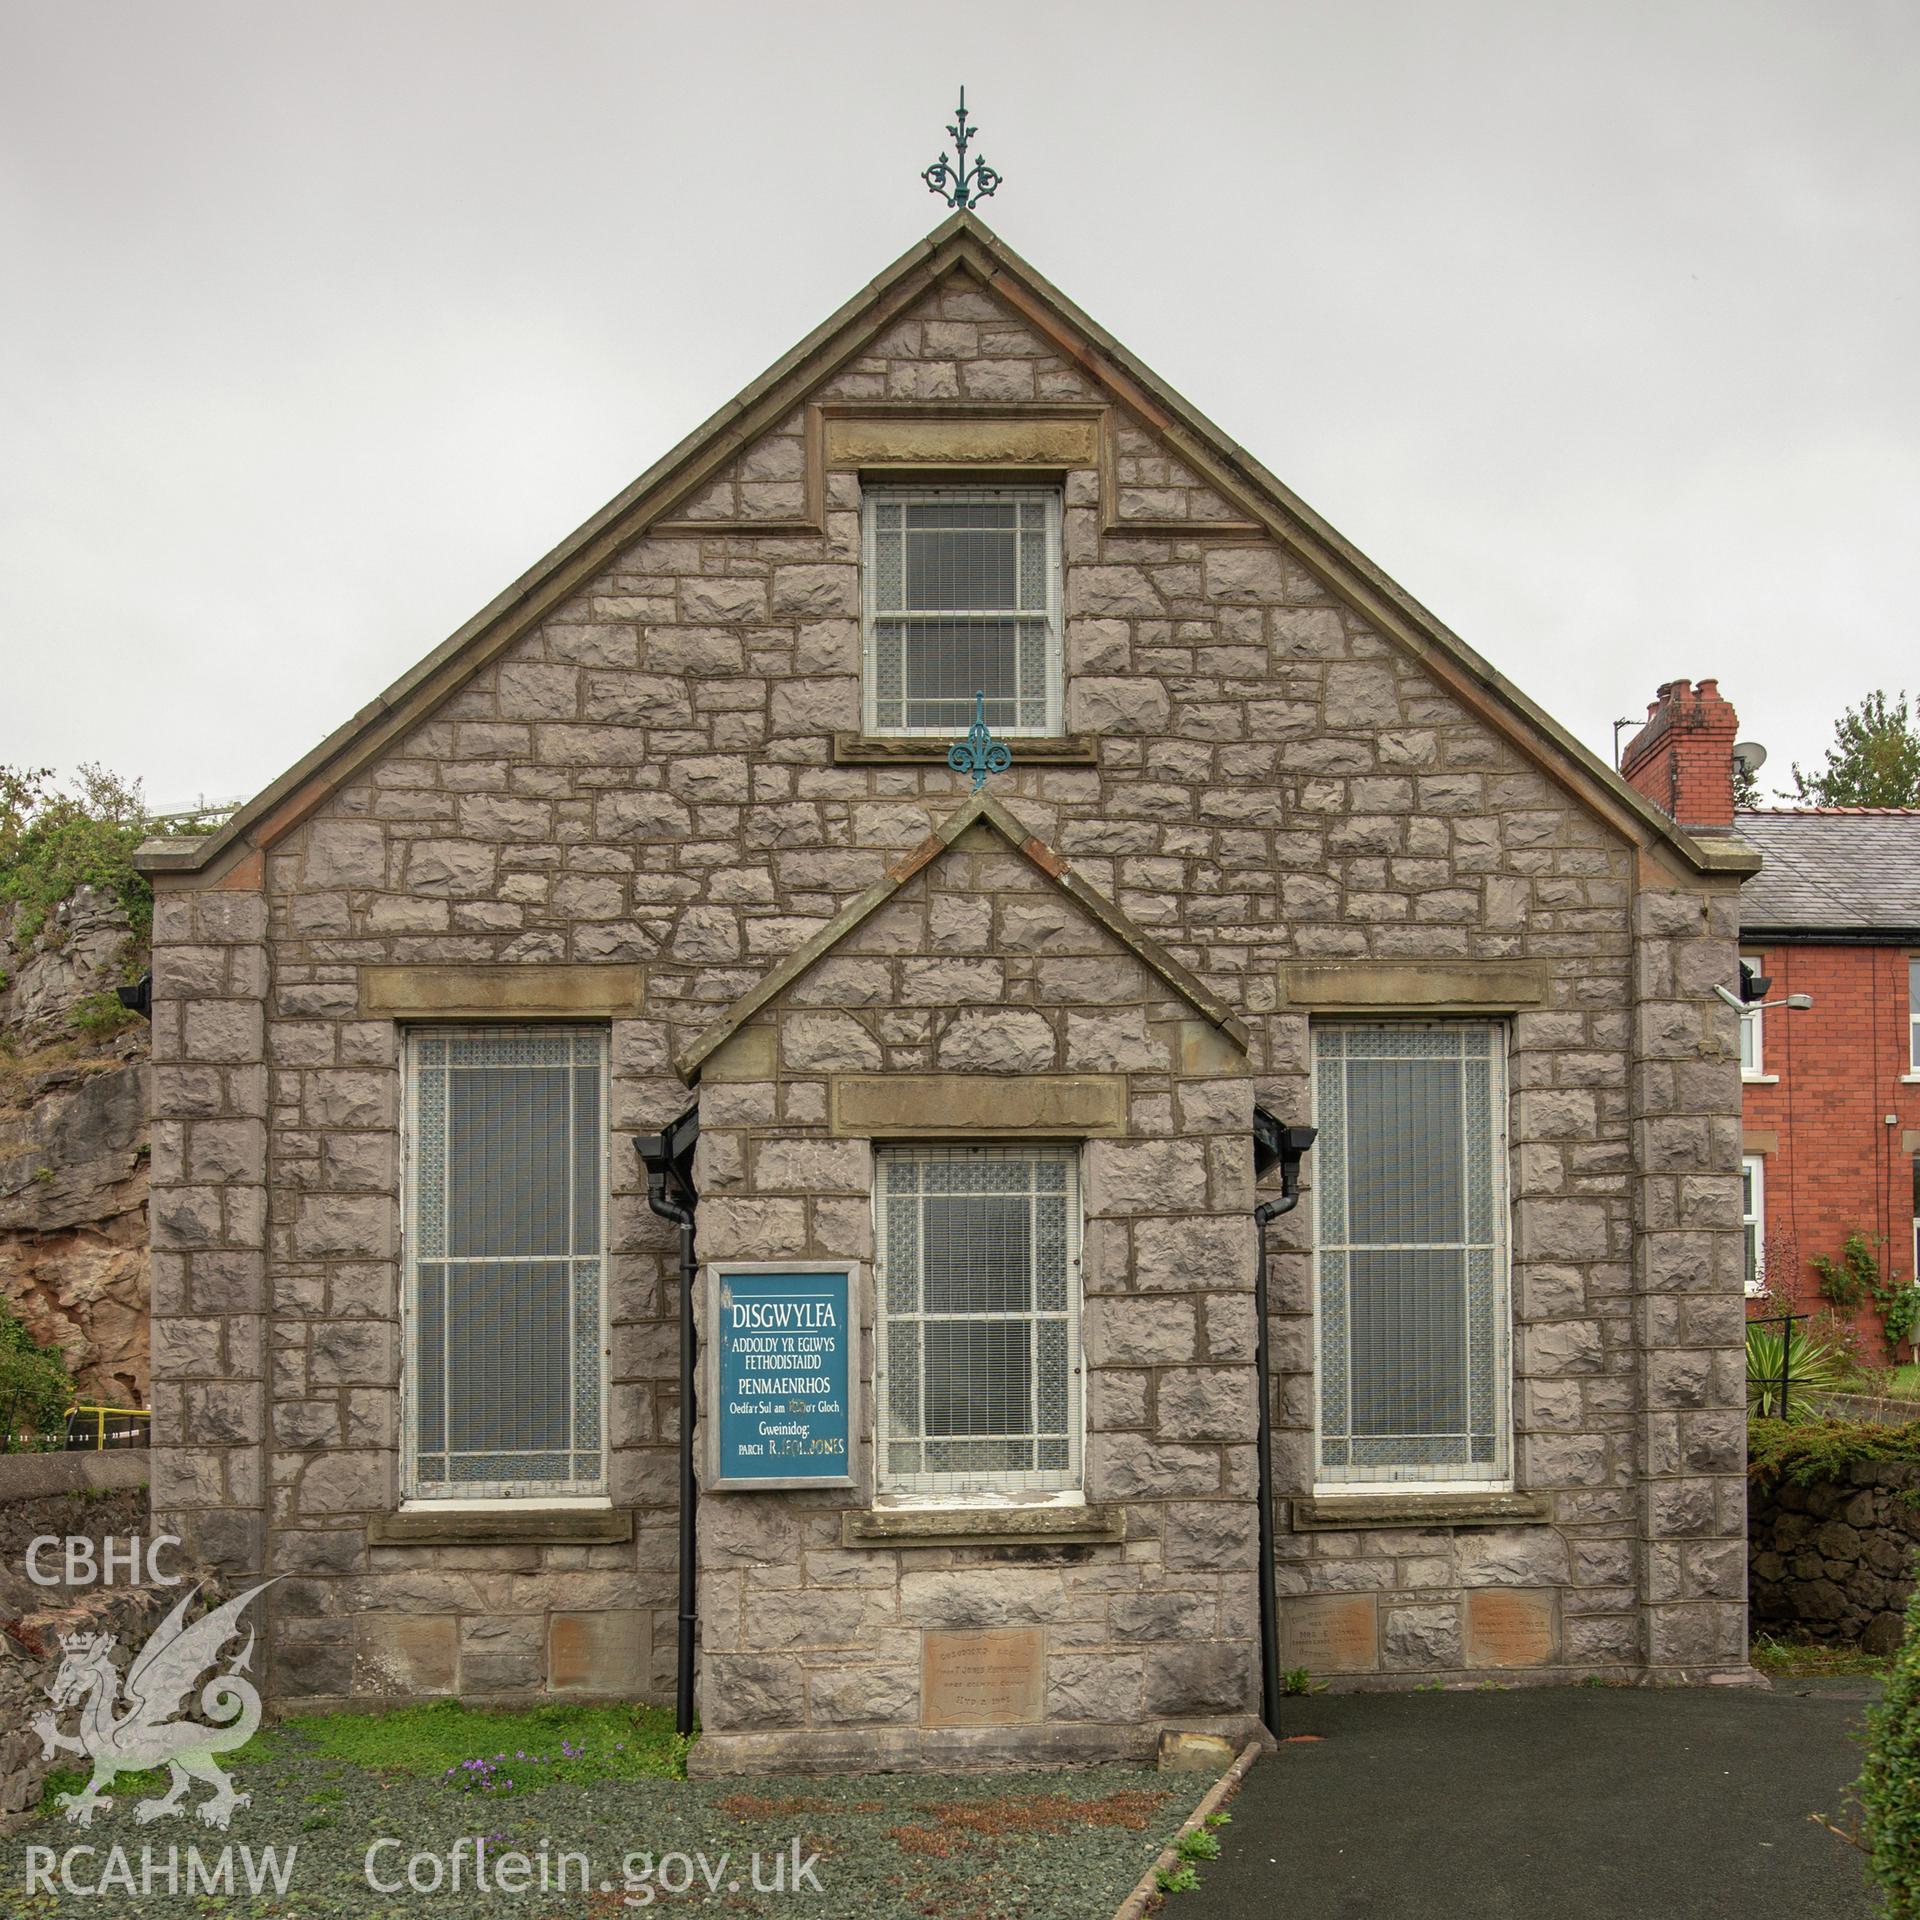 Colour photograph showing front elevation of Disgwylfa Wesleyan Methodist Chapel, Tanllwyfan, Old Colwyn. Photographed by Richard Barrett on 17th September 2018.